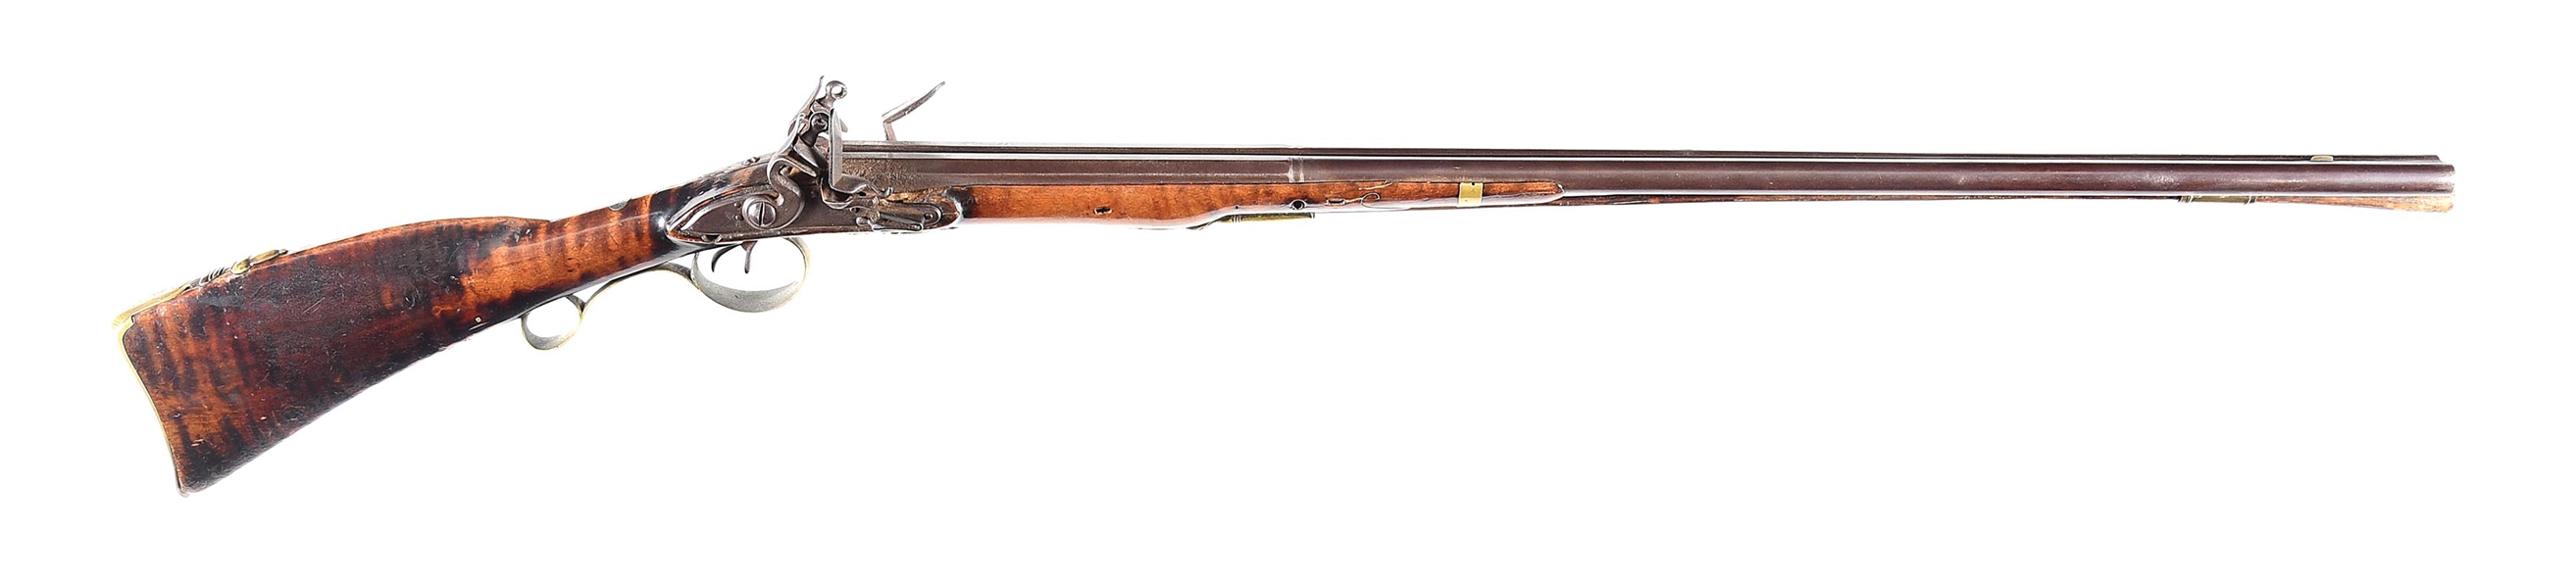 (A) UNTOUCHED AMERICAN TIGER MAPLE STOCKED FLINTLOCK DOUBLE BARREL SIDE BY SIDE SHOTGUN WITH INLAID TRADE SILVER.